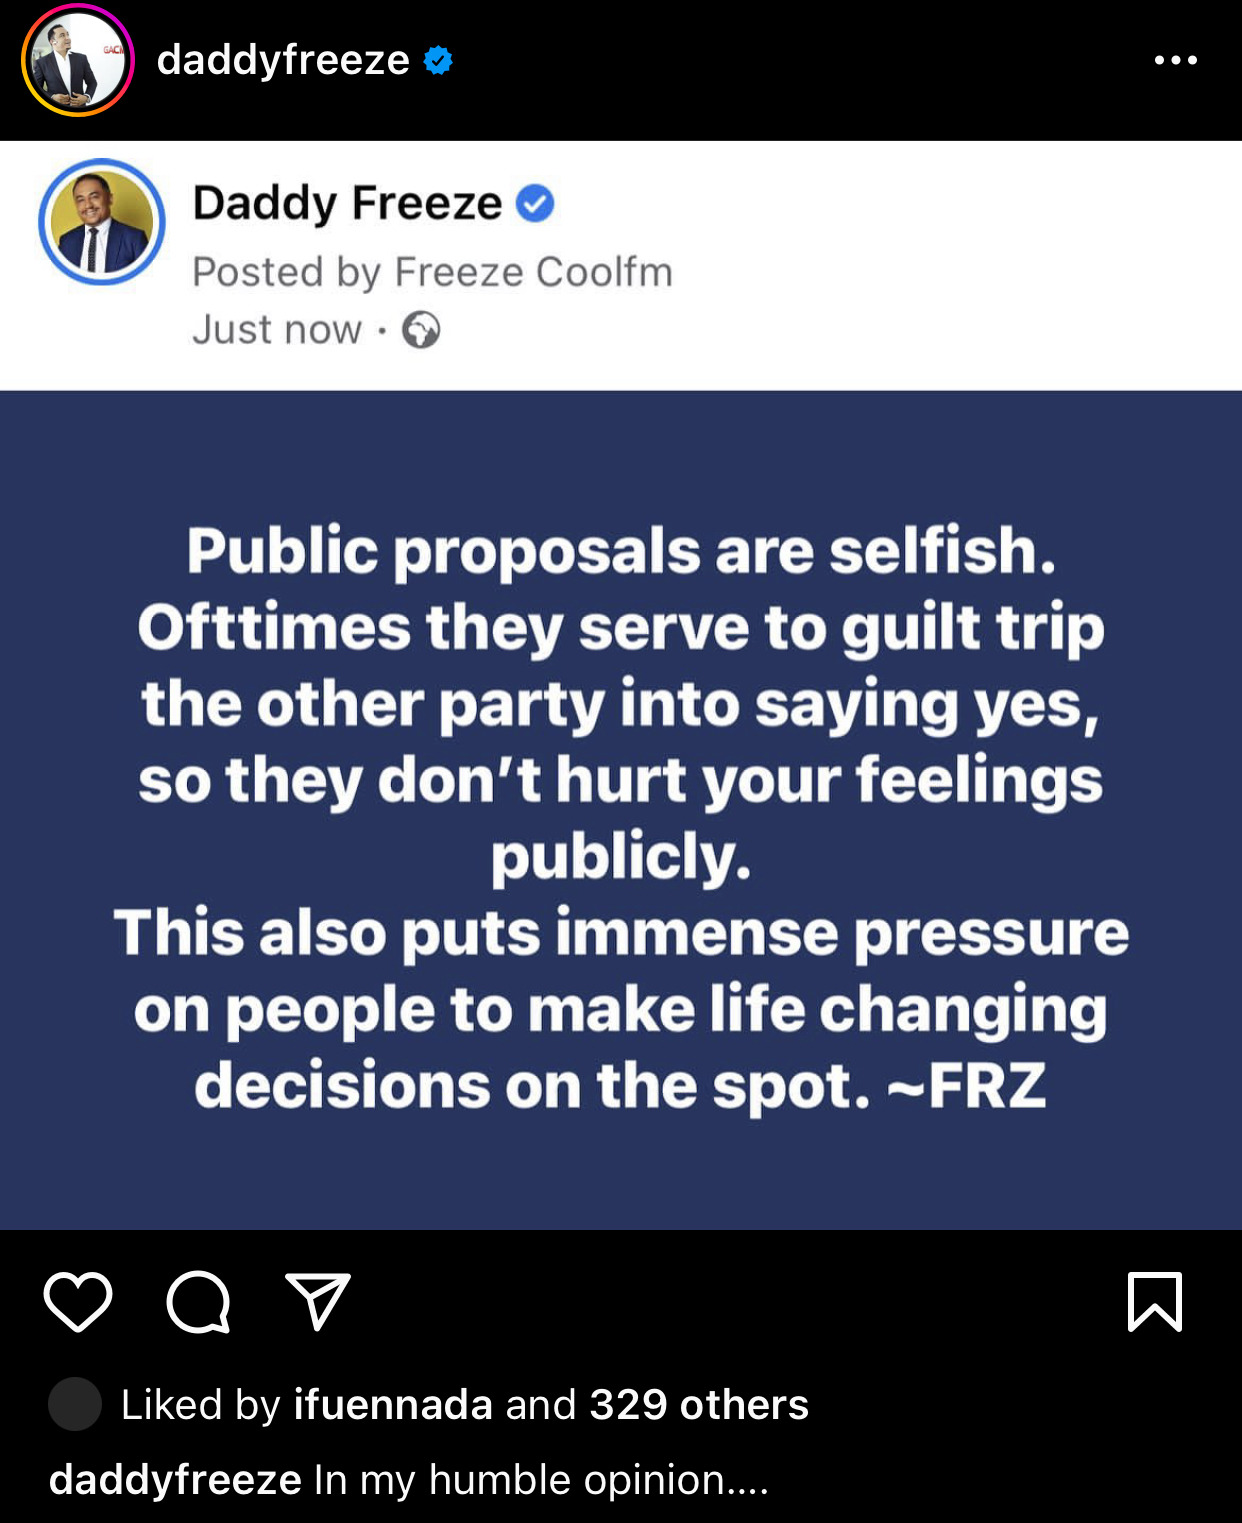 Daddyfreeze Calls out People who propose publicly